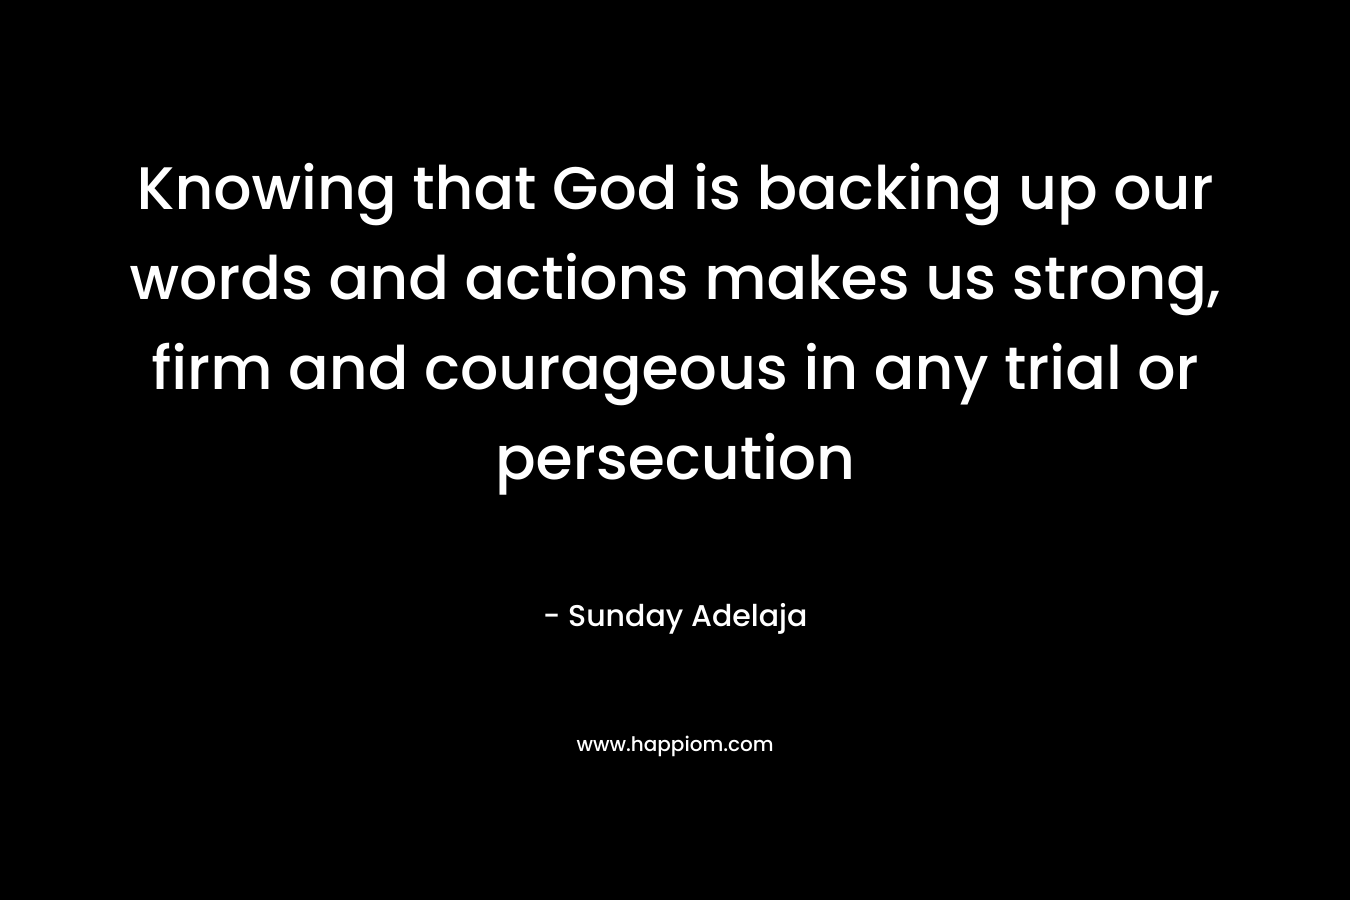 Knowing that God is backing up our words and actions makes us strong, firm and courageous in any trial or persecution